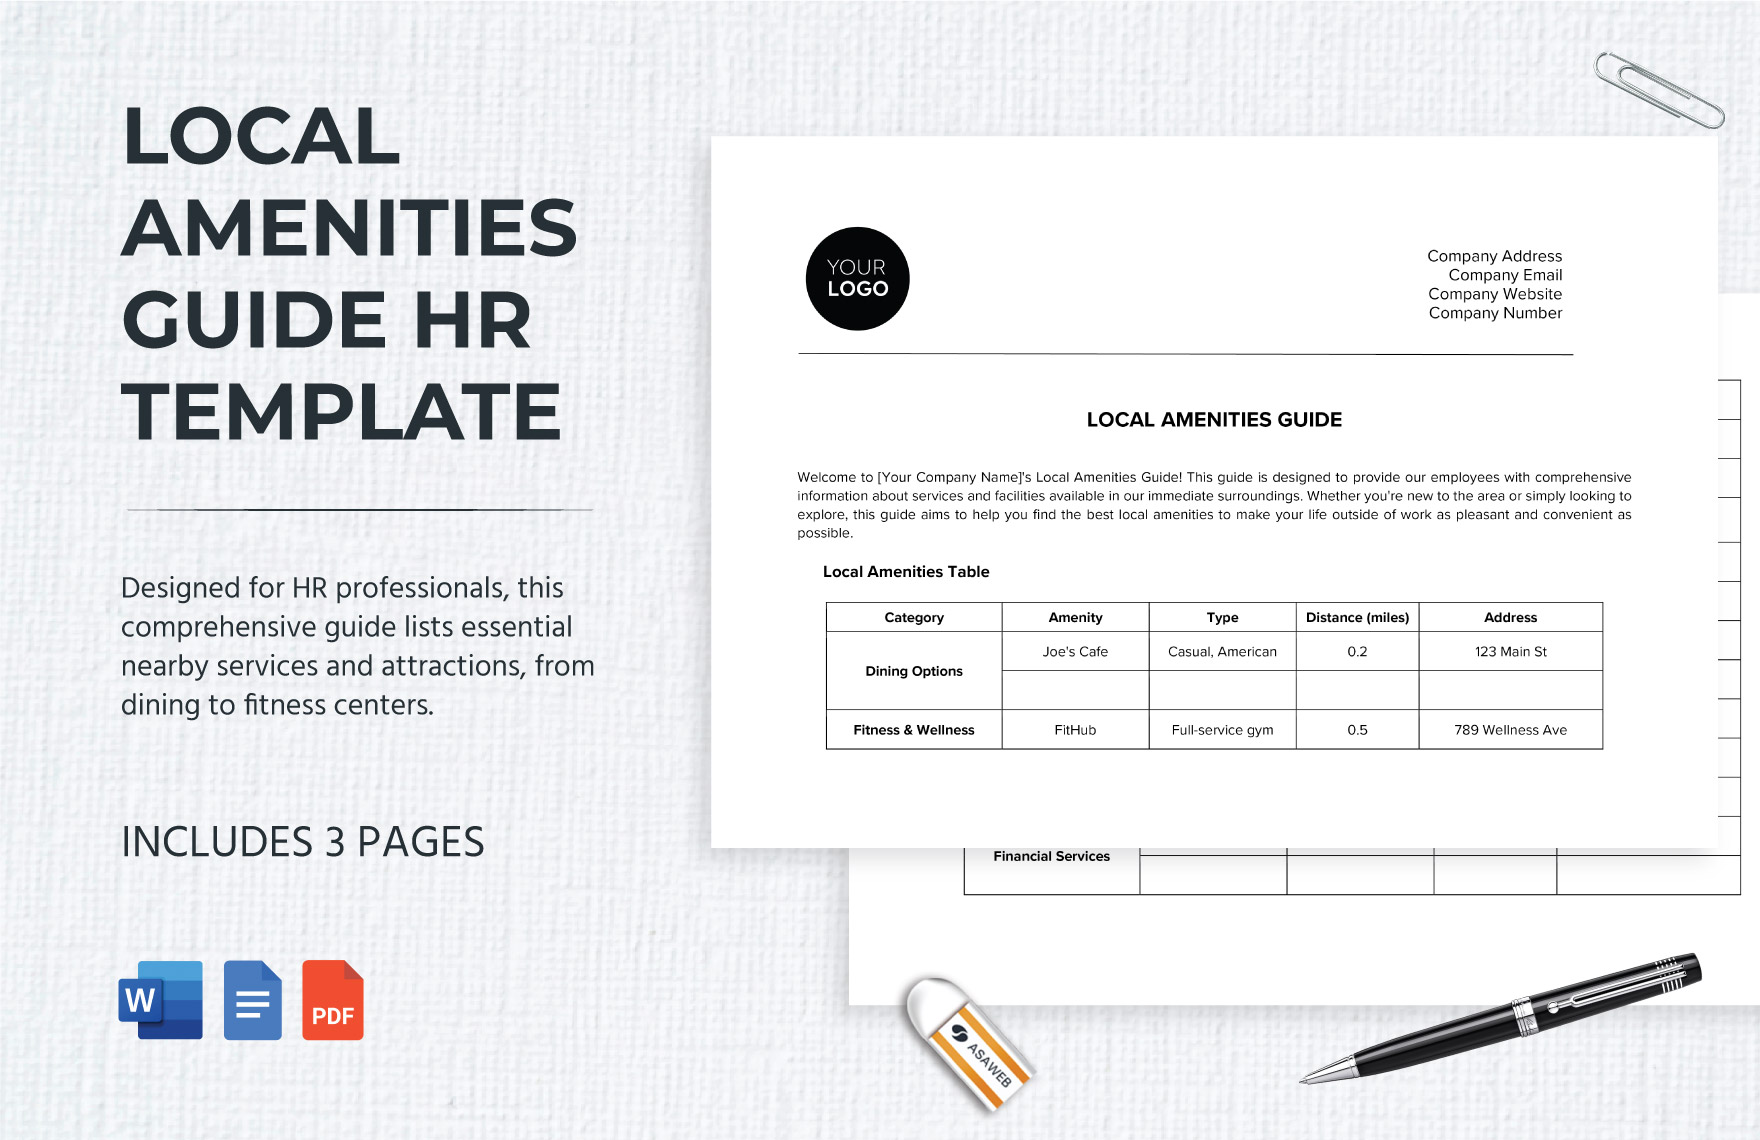 Local Amenities Guide HR Template